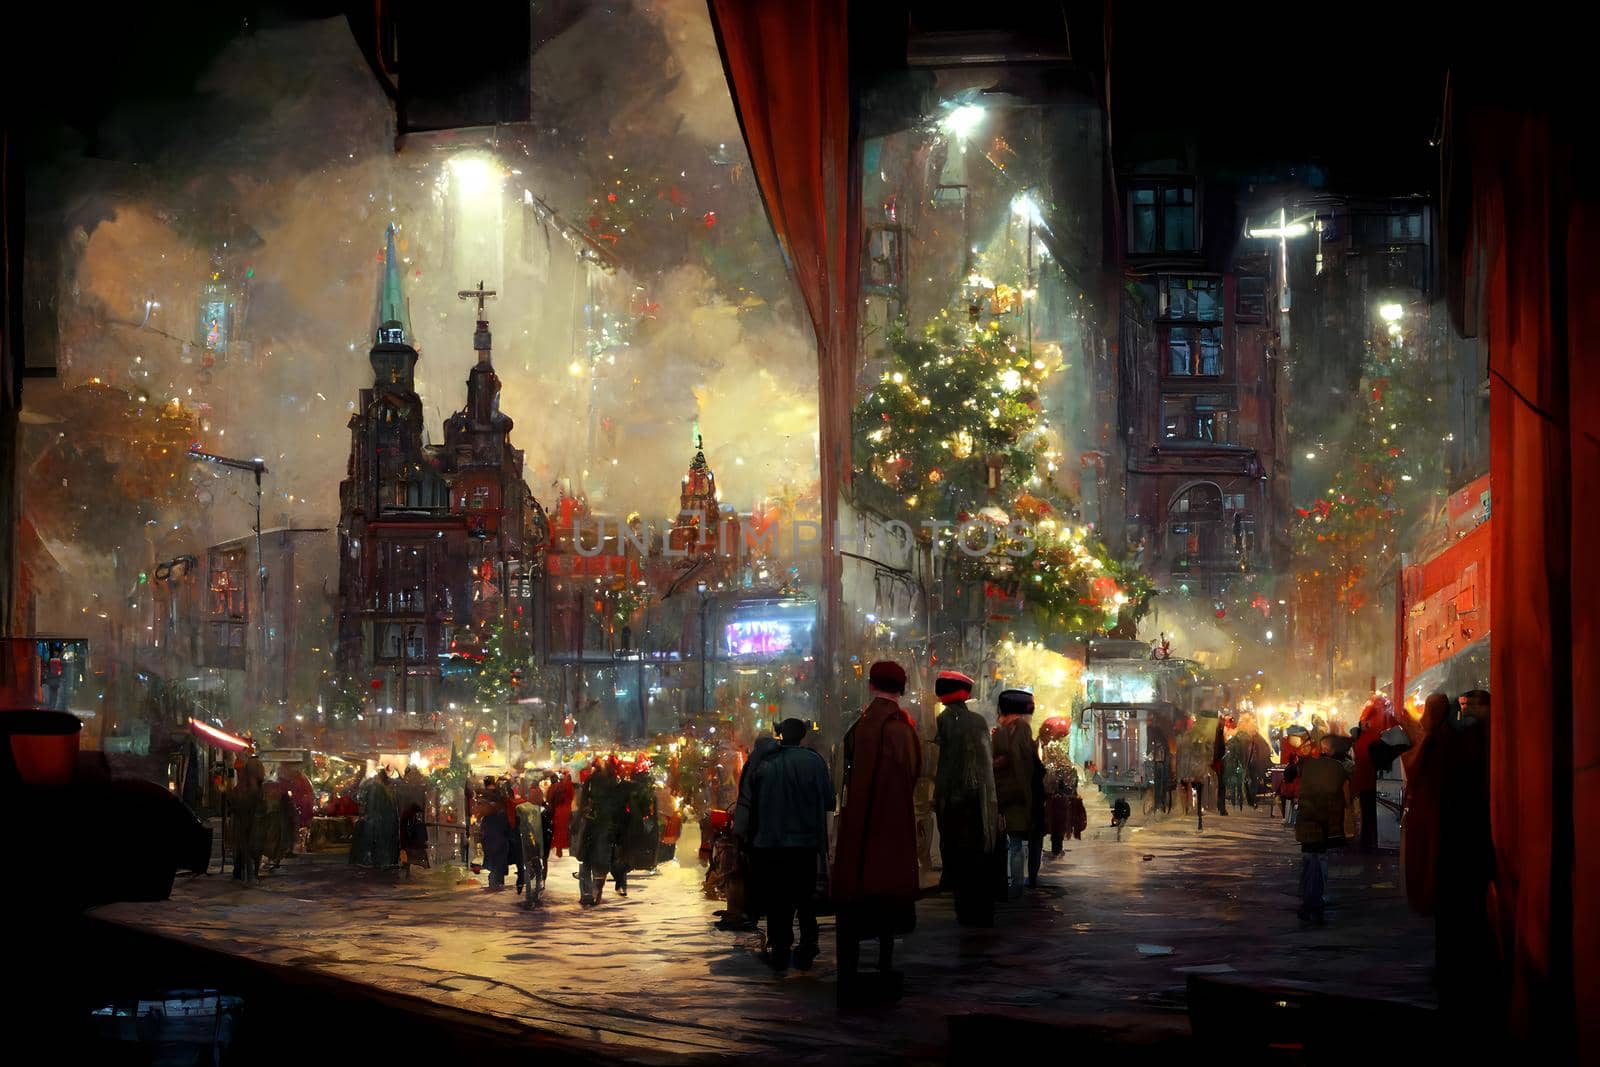 night crowded christmas european town street, neural network generated art. Digitally generated image. Not based on any actual scene or pattern.